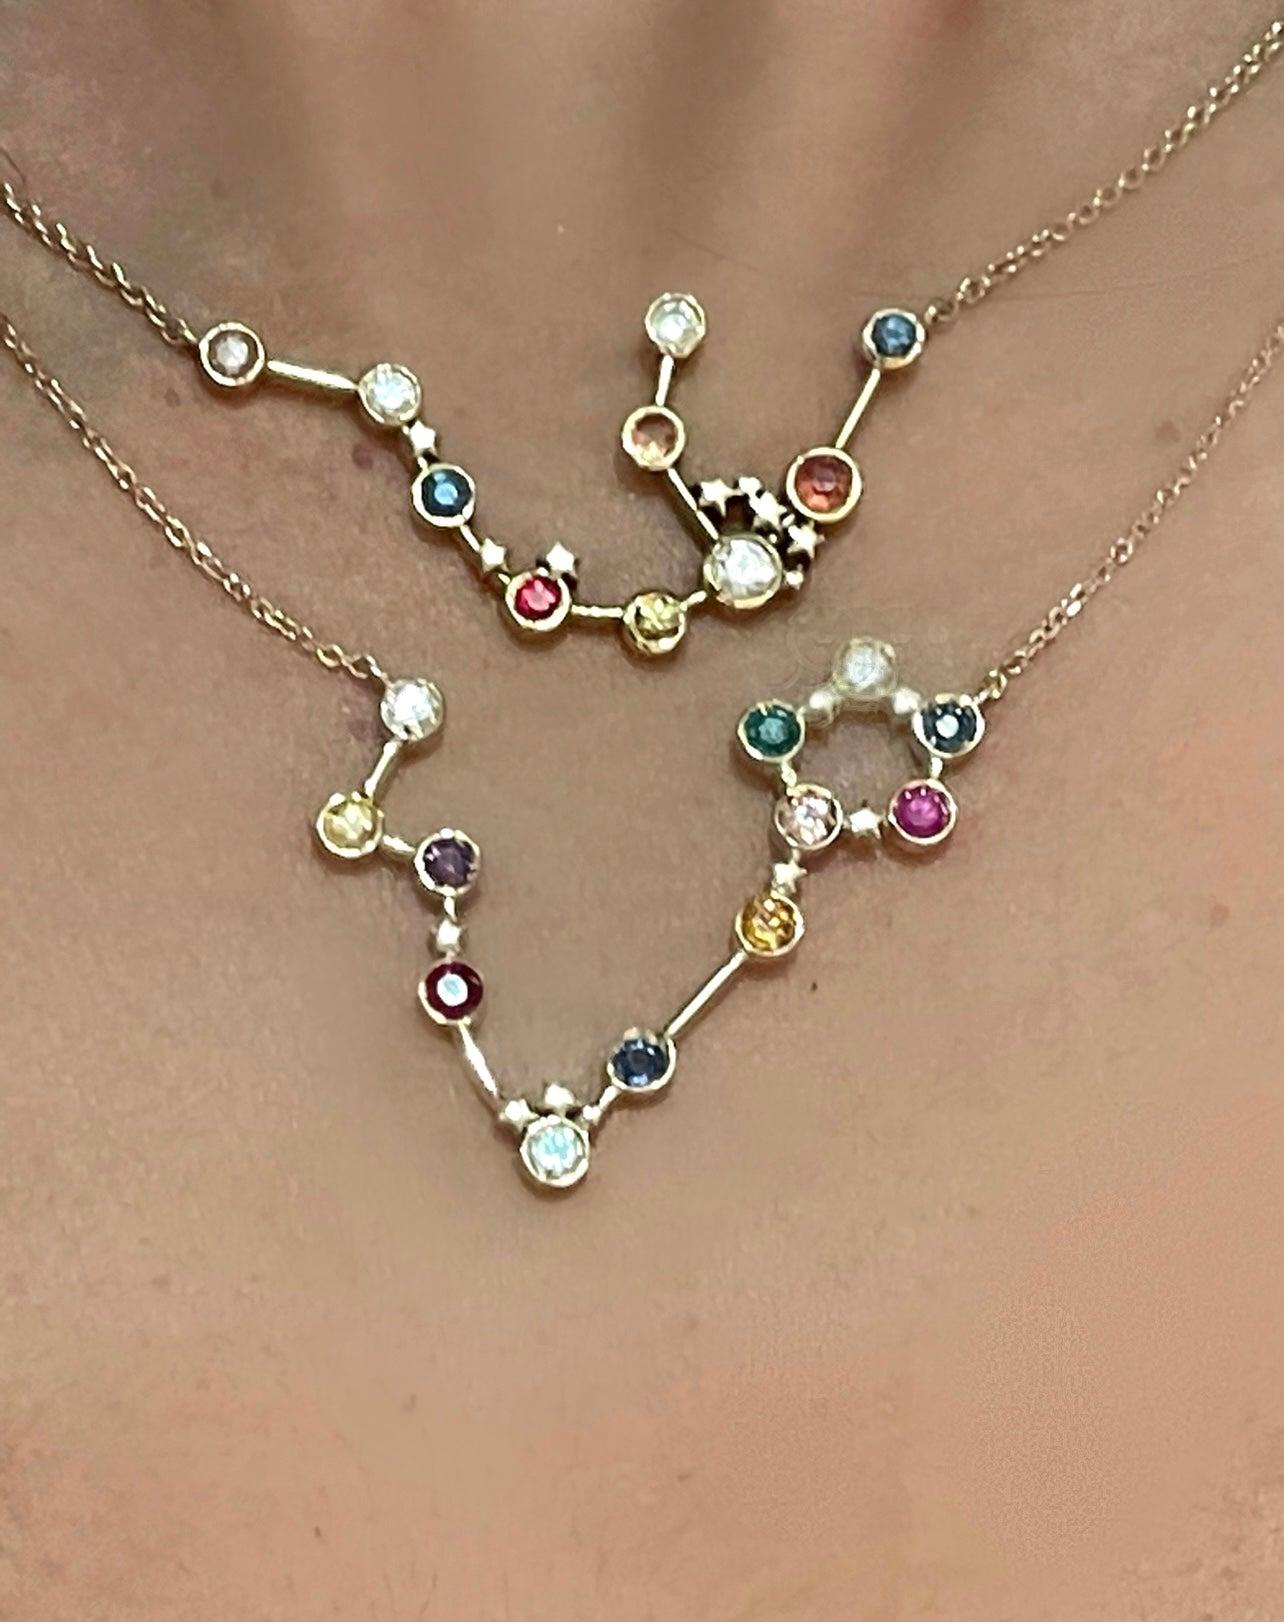 Brilliant Cut 18k Yellow Gold Aquarius Constellation Necklace with Sapphires and Diamonds